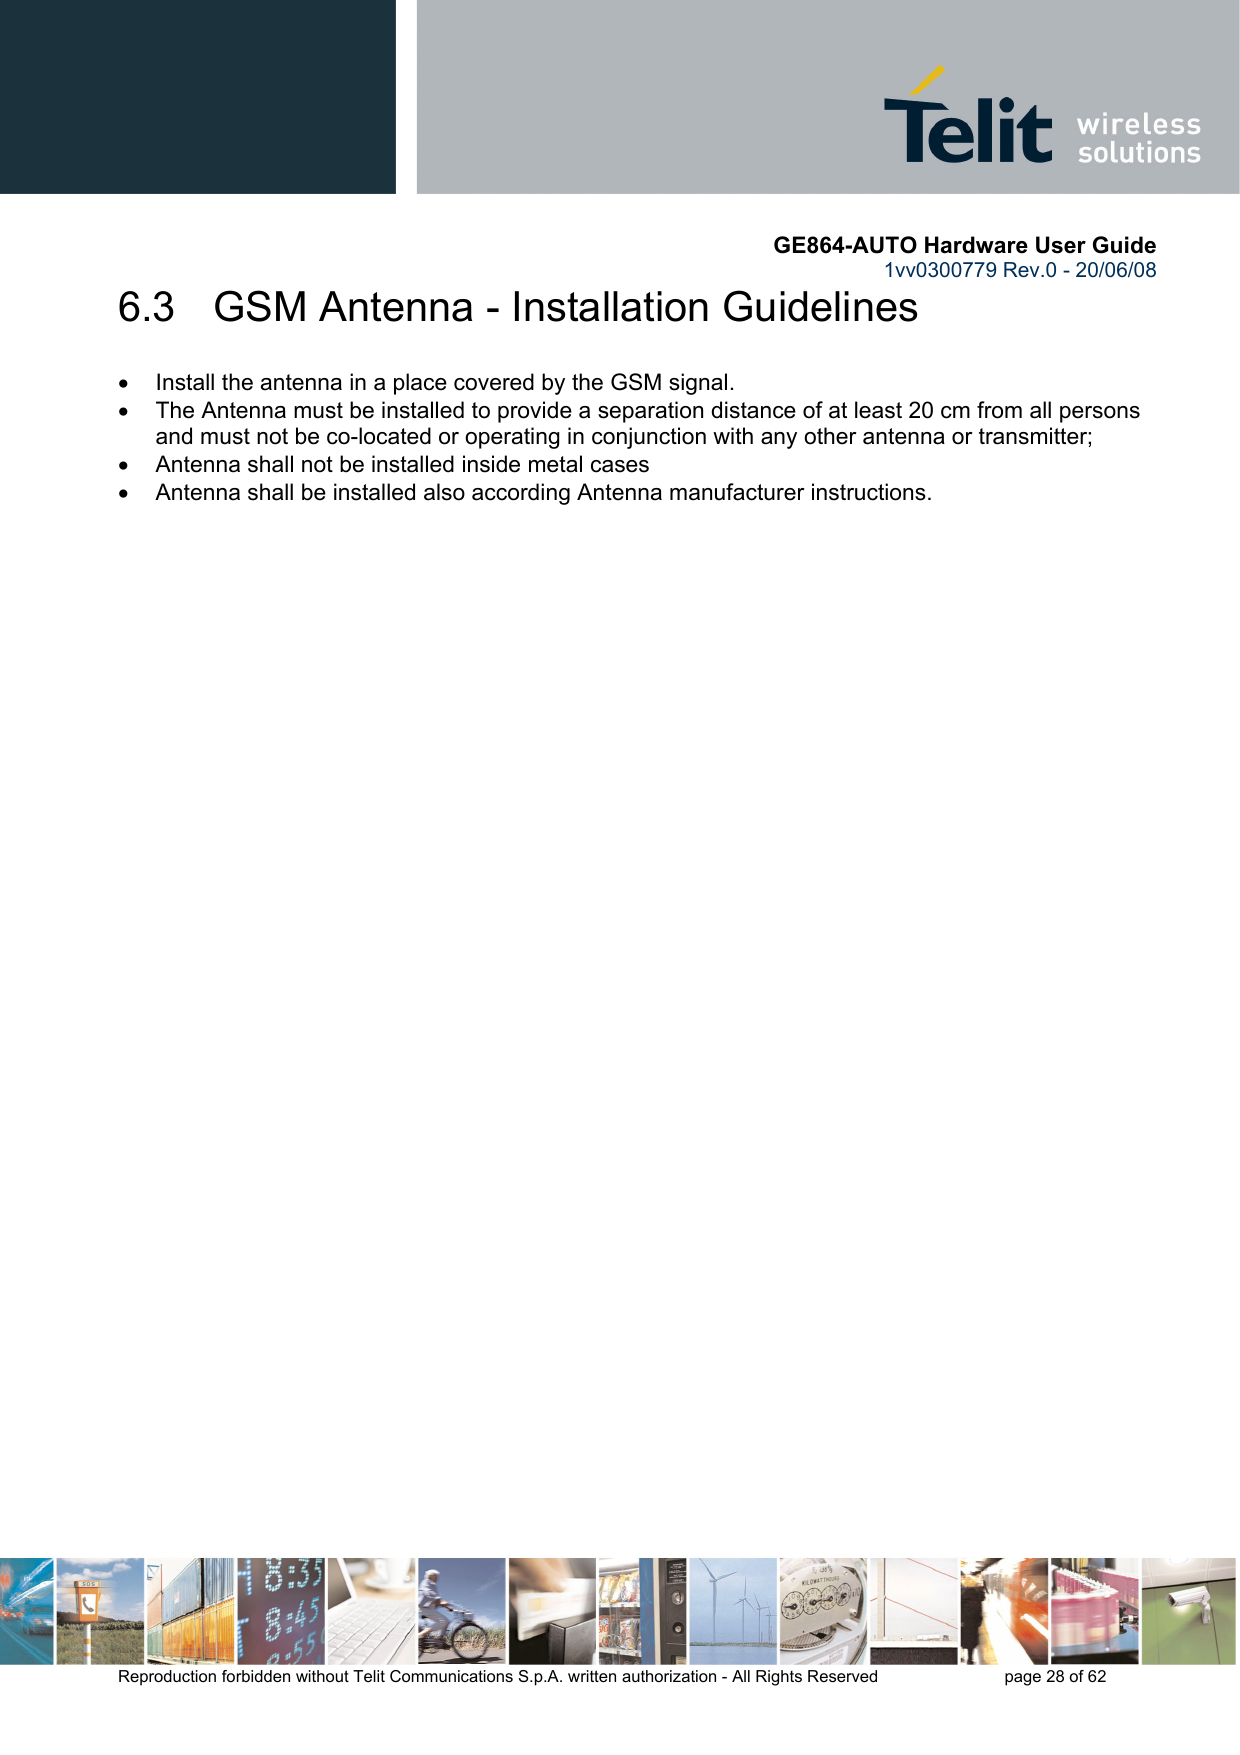       GE864-AUTO Hardware User Guide 1vv0300779 Rev.0 - 20/06/08      Reproduction forbidden without Telit Communications S.p.A. written authorization - All Rights Reserved    page 28 of 62  6.3   GSM Antenna - Installation Guidelines •  Install the antenna in a place covered by the GSM signal. •  The Antenna must be installed to provide a separation distance of at least 20 cm from all persons and must not be co-located or operating in conjunction with any other antenna or transmitter; •  Antenna shall not be installed inside metal cases  •  Antenna shall be installed also according Antenna manufacturer instructions.     